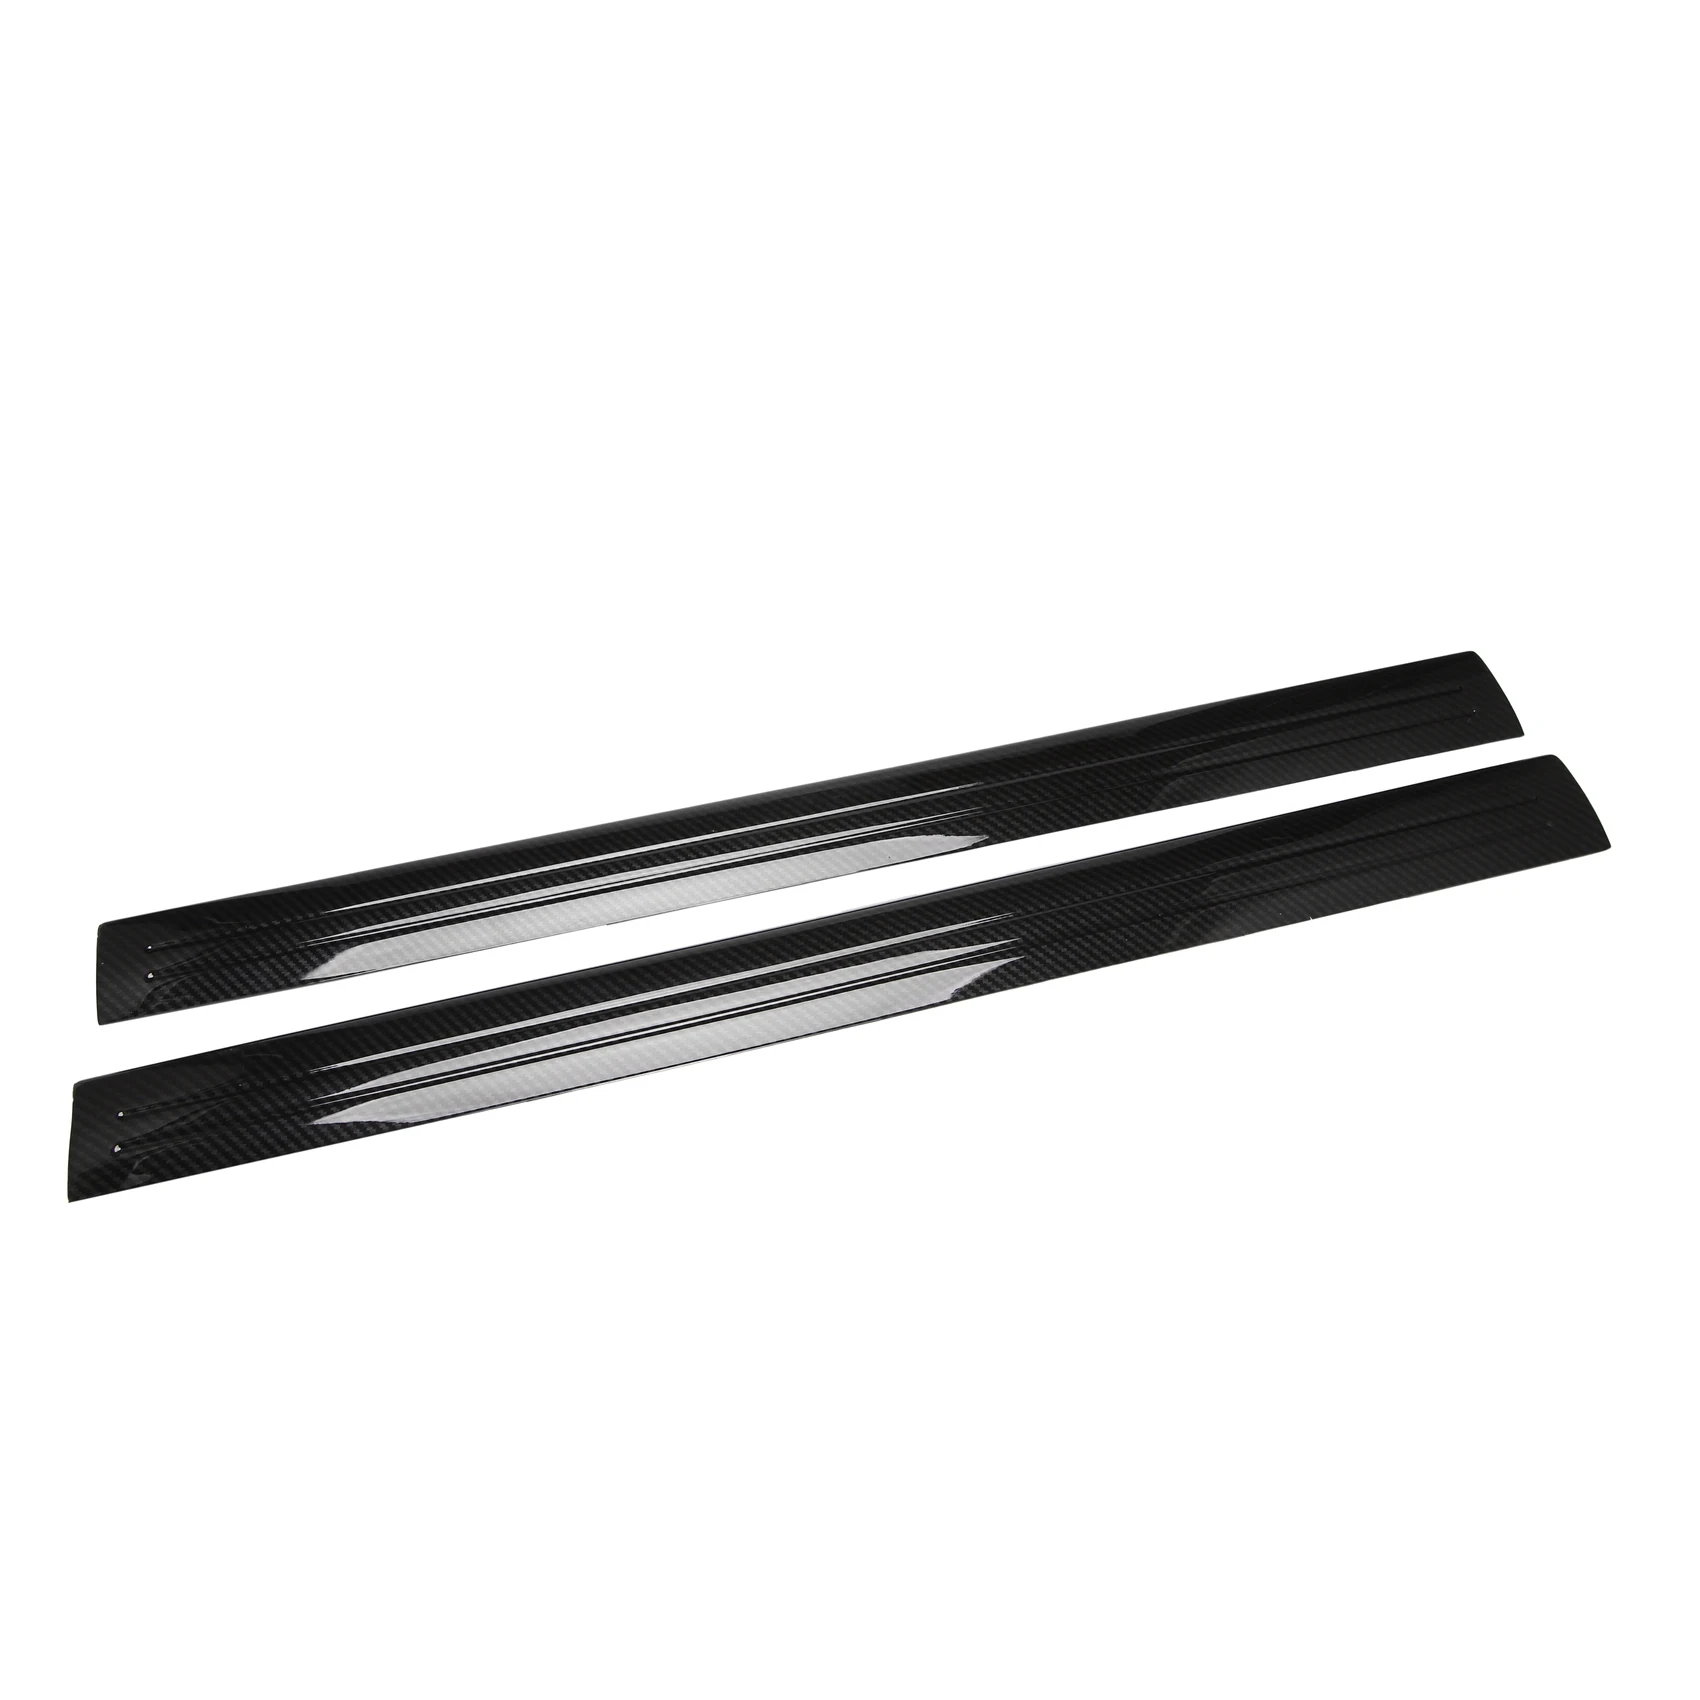 

Car Modified Threshold Strip Decorative Accessories for -Beetle 2001-2010